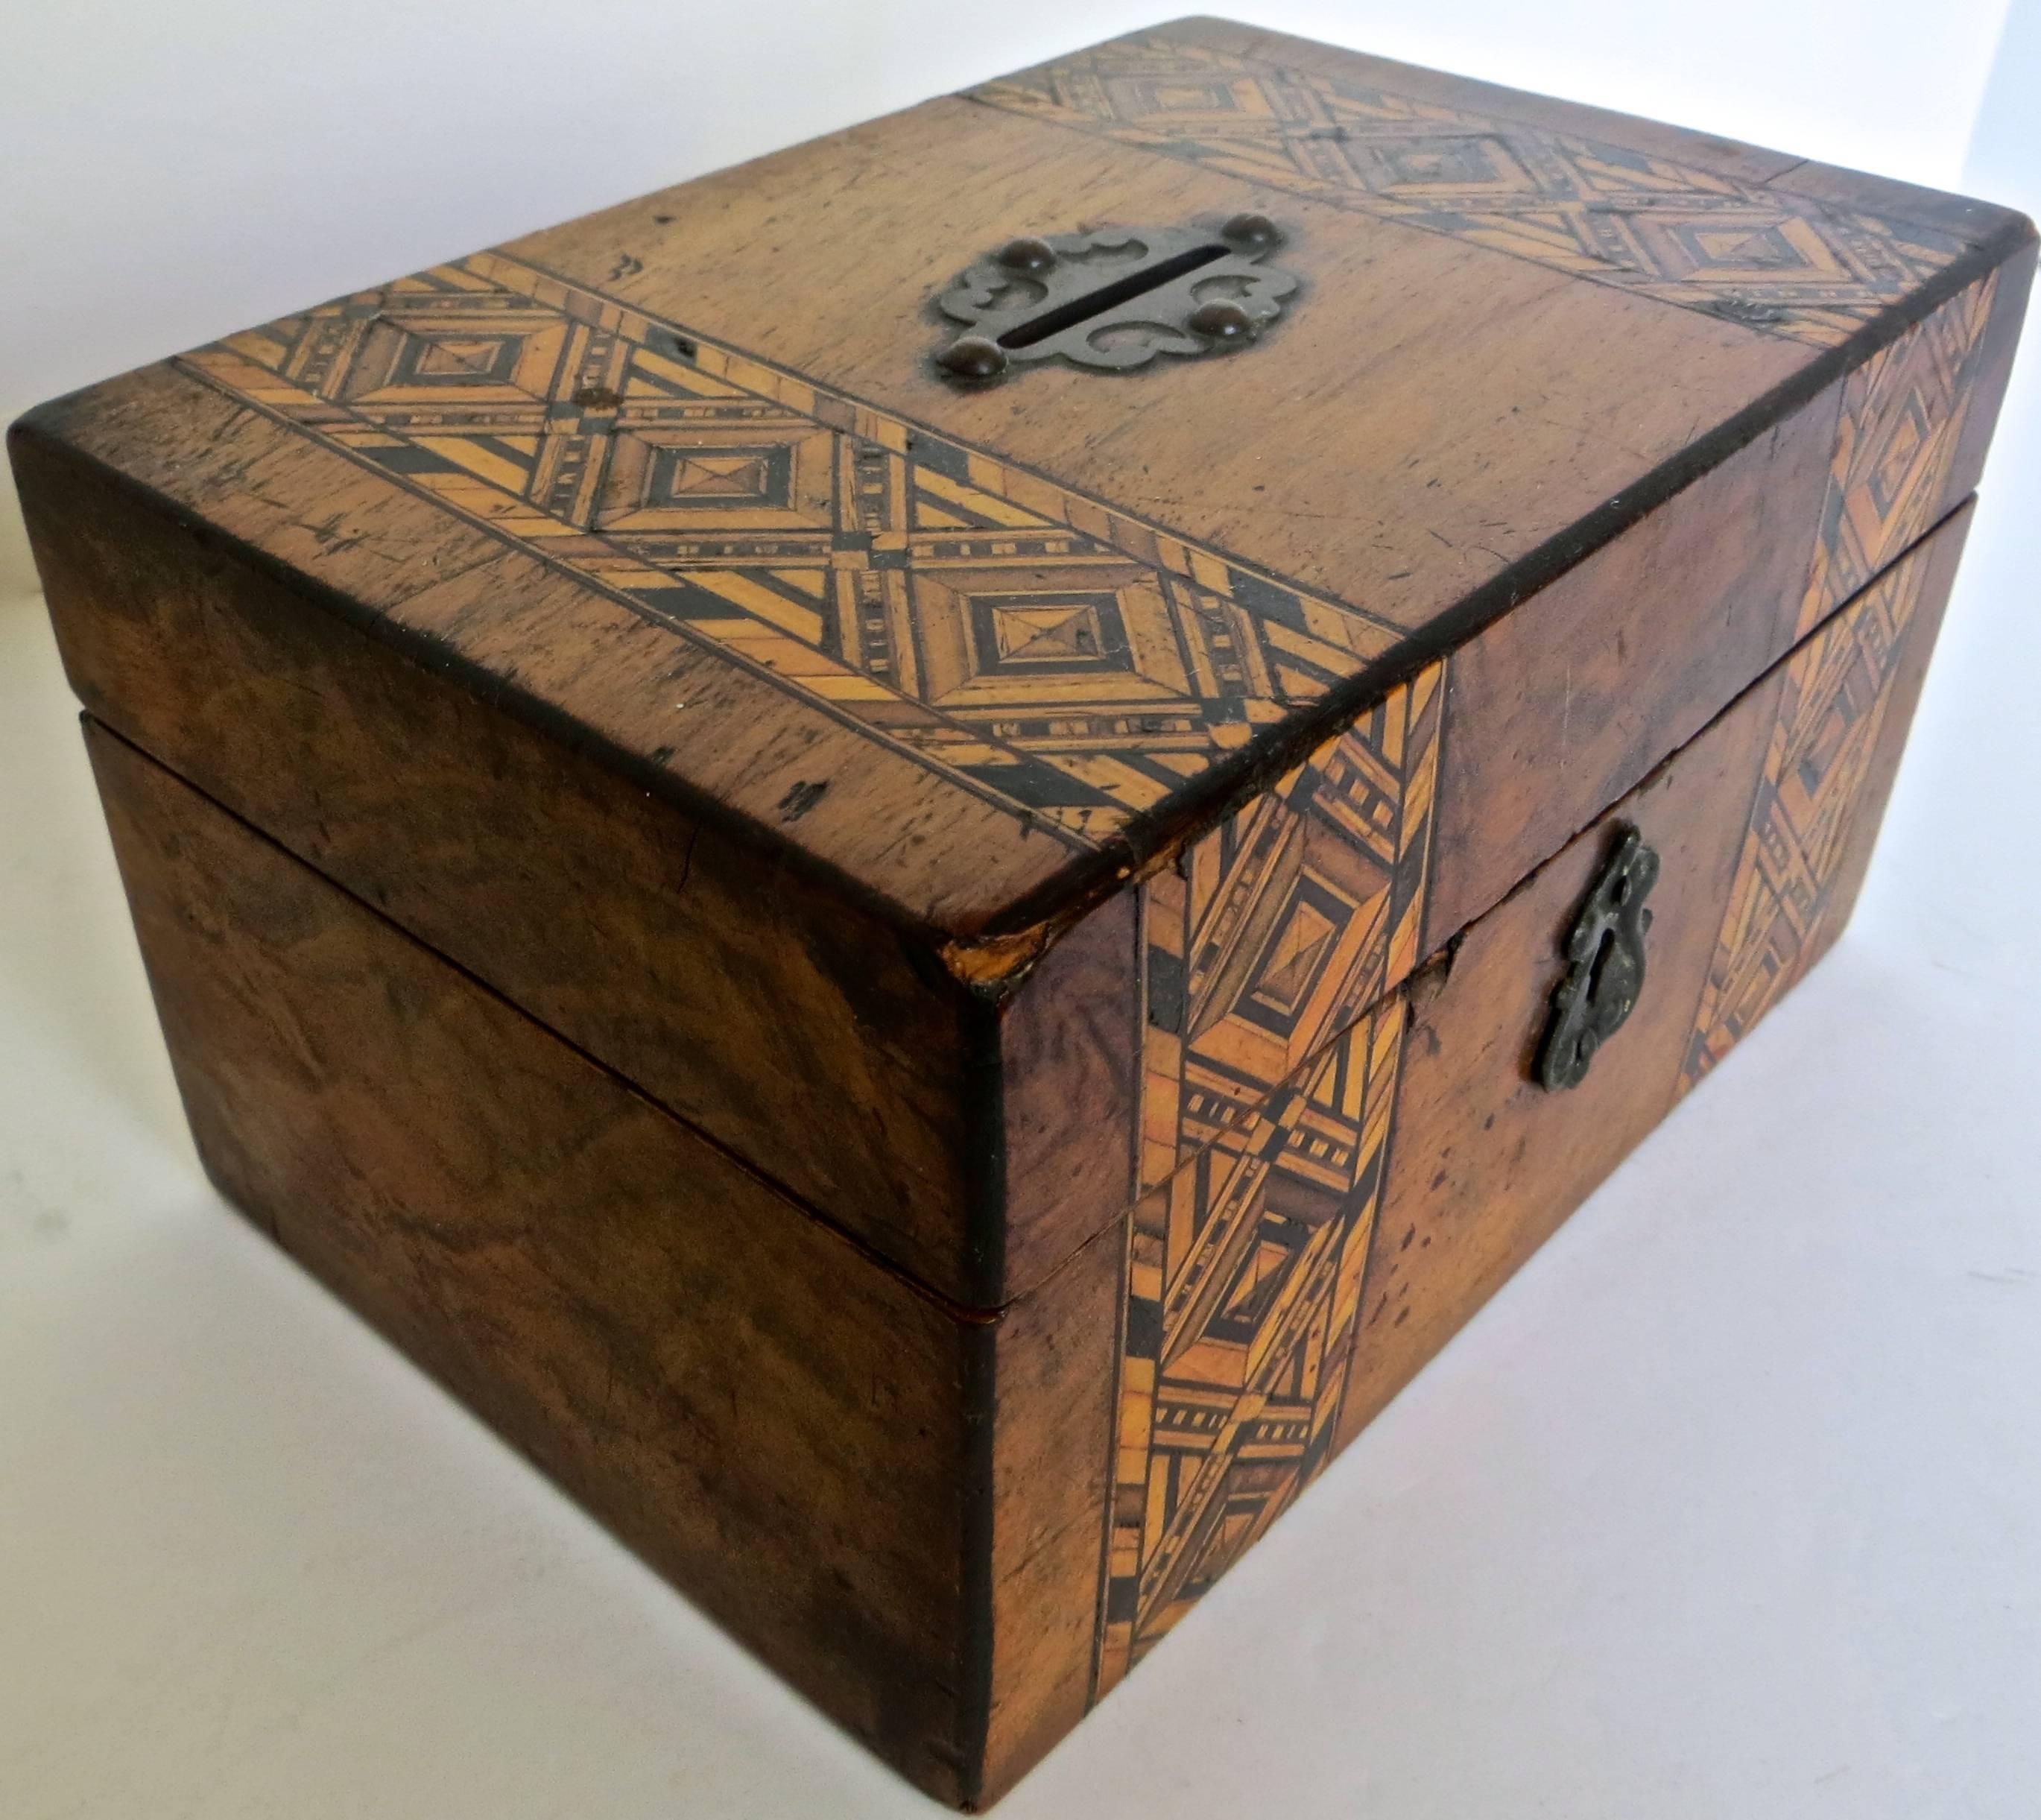 This Tunbridge box still bank is indigenous to the Tunbridge ware cottage industries of the town of Tunbridge Wells, Kent, England in the 18th and 19th century. Typically the boxes were inlaid with a multiplicity of different colored woods, cut in